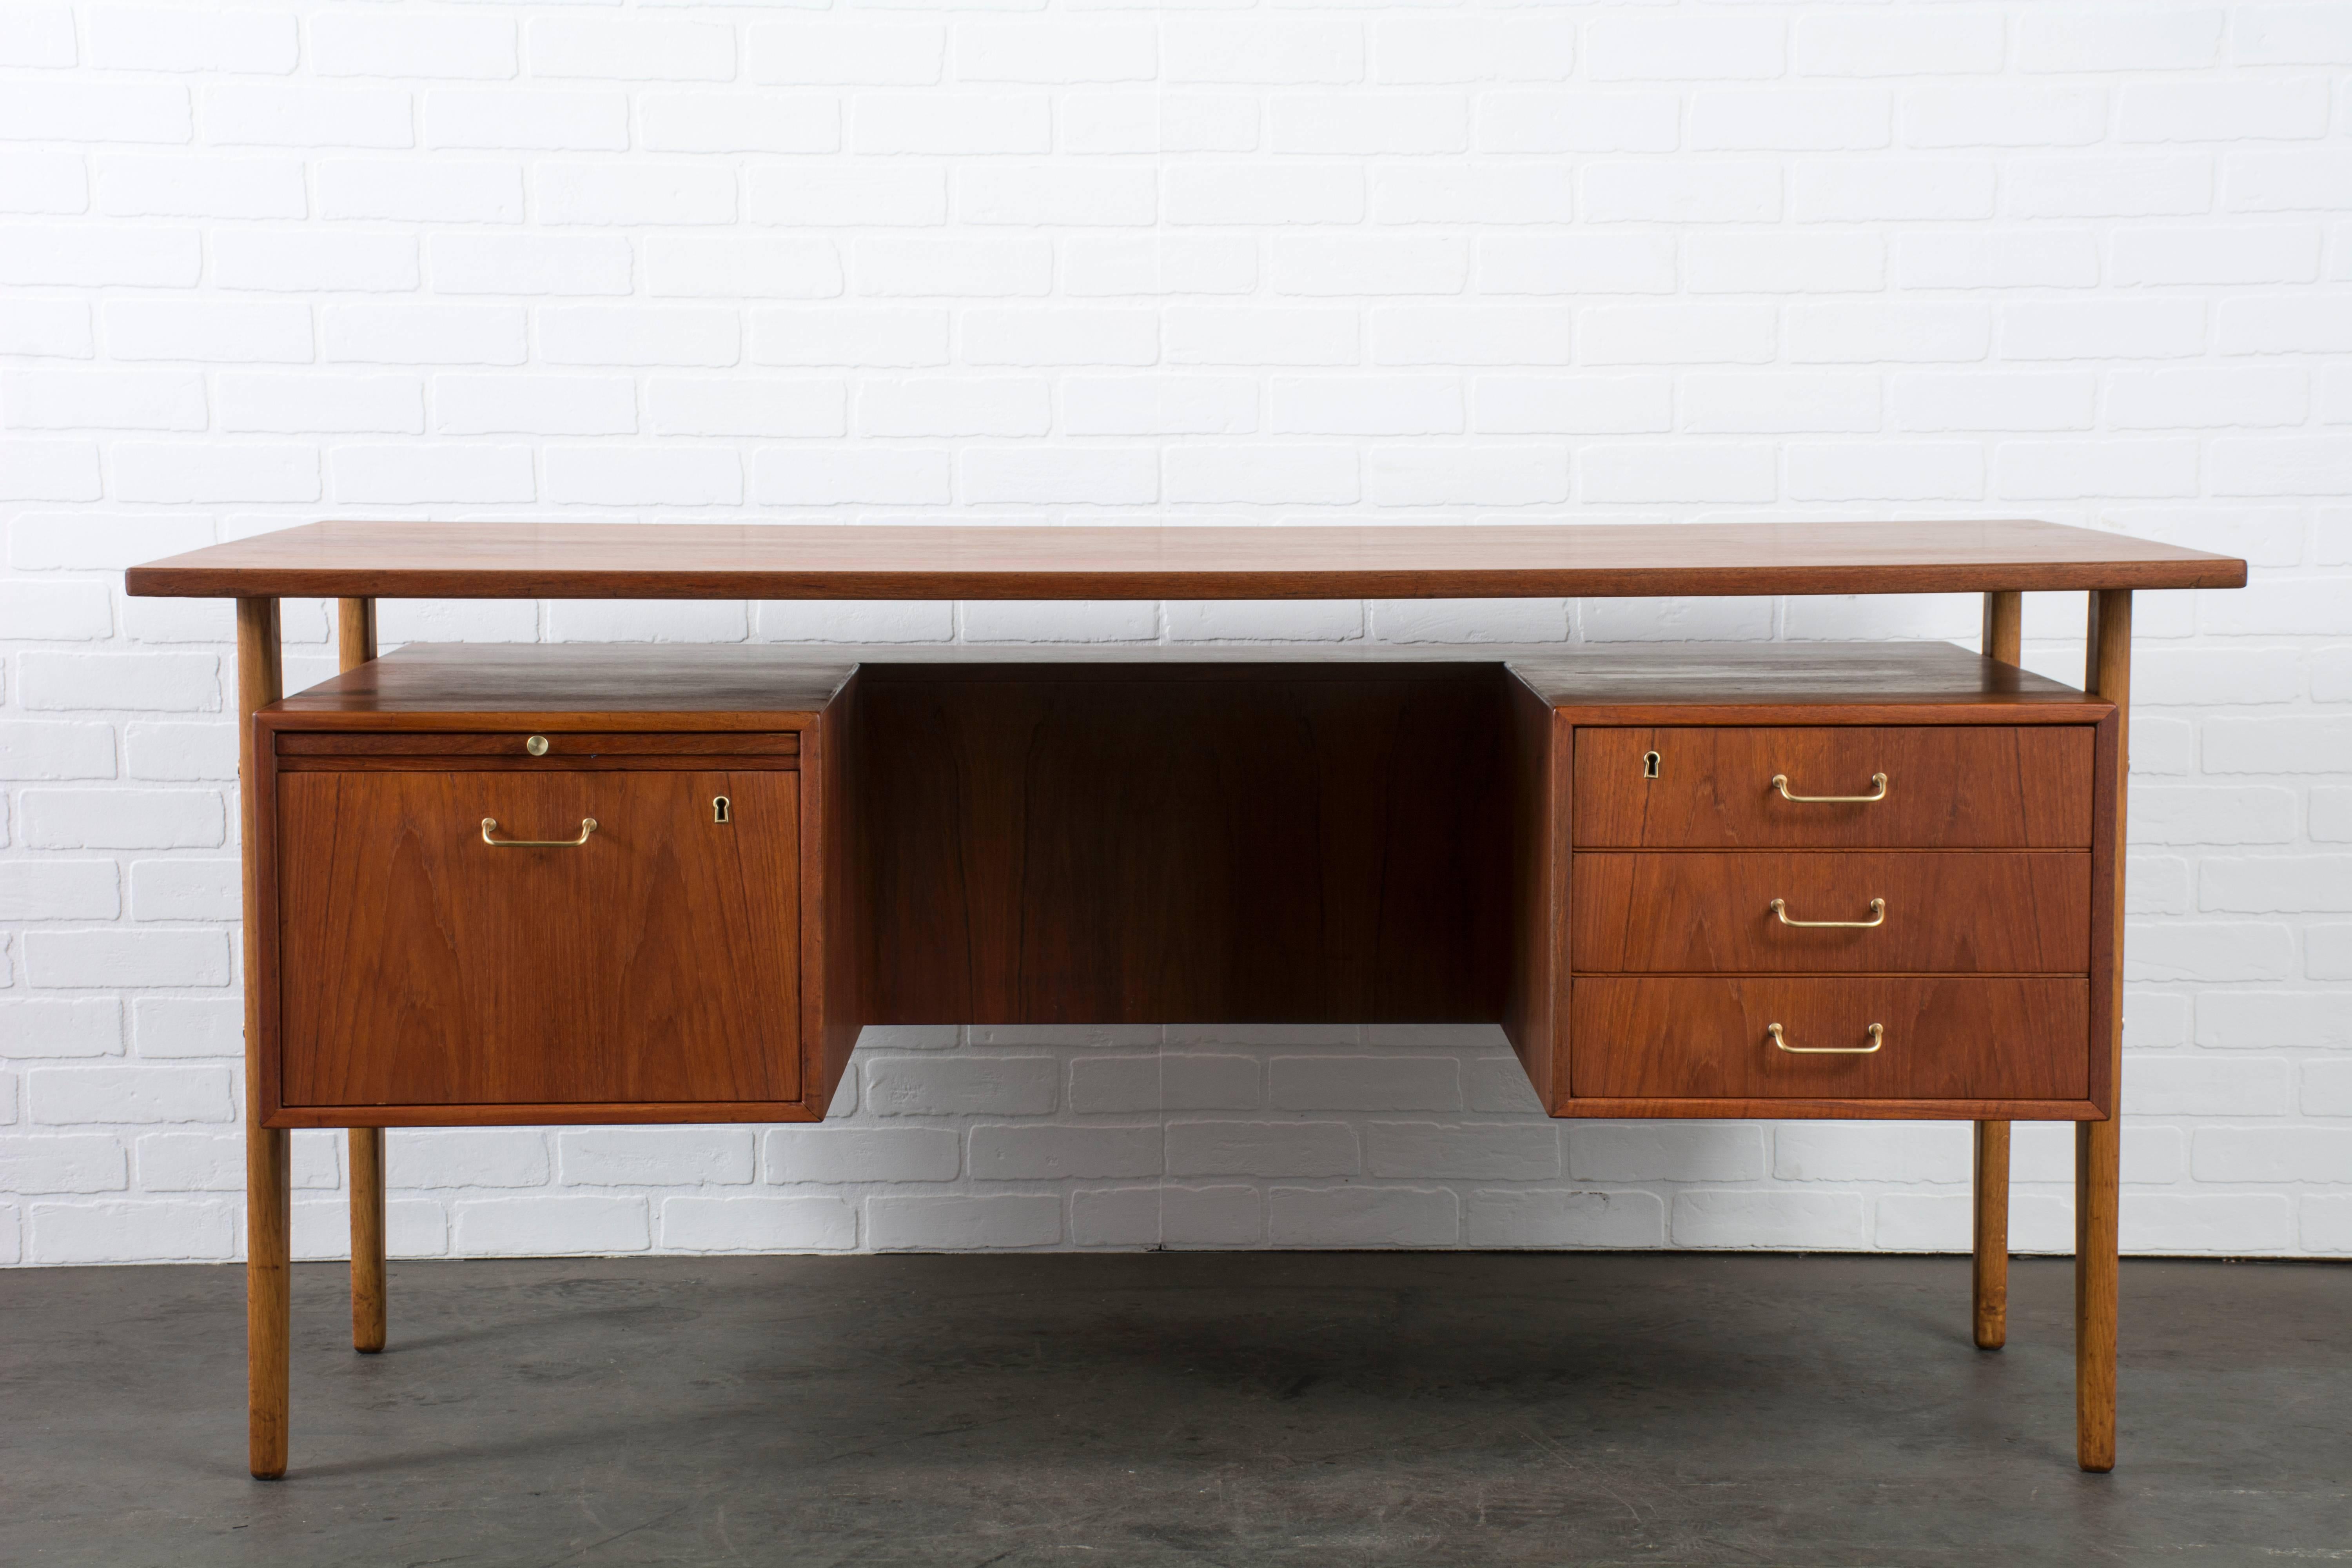 This vintage Mid-Century teak executive desk was designed by Torben Strandgaard in the 1960s. It features a floating top, a finished back with a shelf, three drawers on the right and one file drawer and pull-out tray on the left. Solid brass